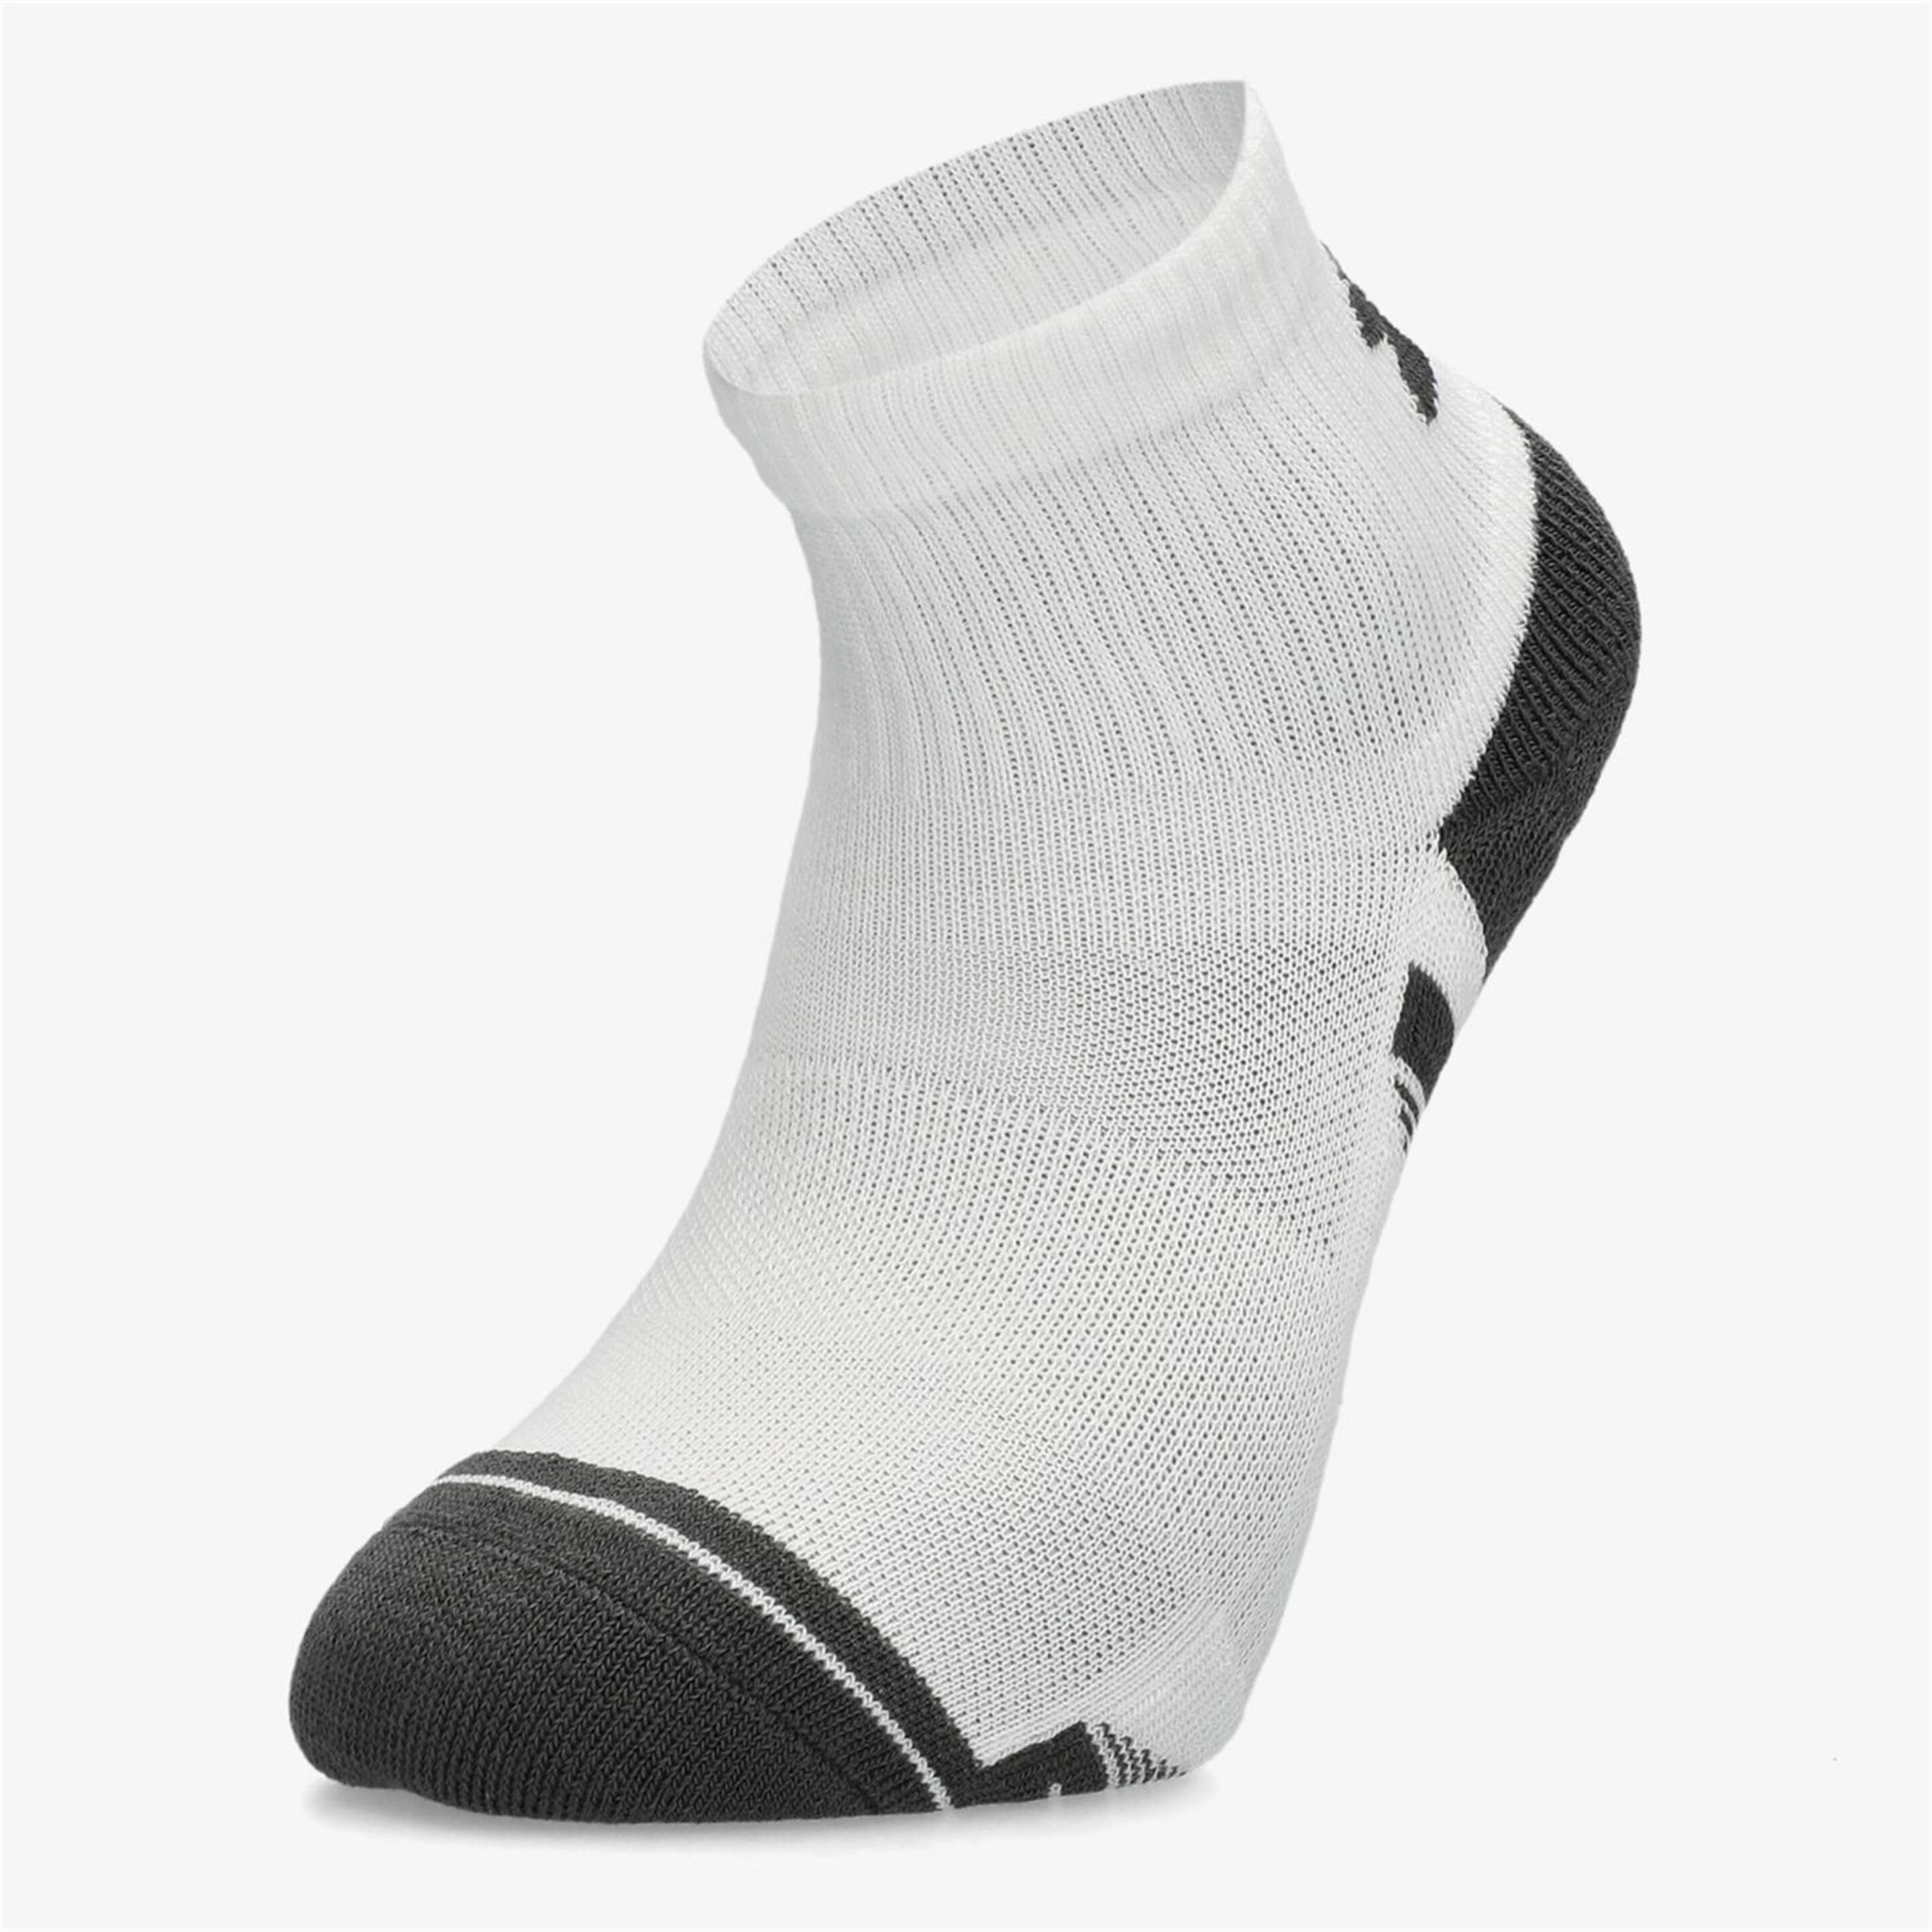 Under Armour Performance Tech - blanco - Calcetines